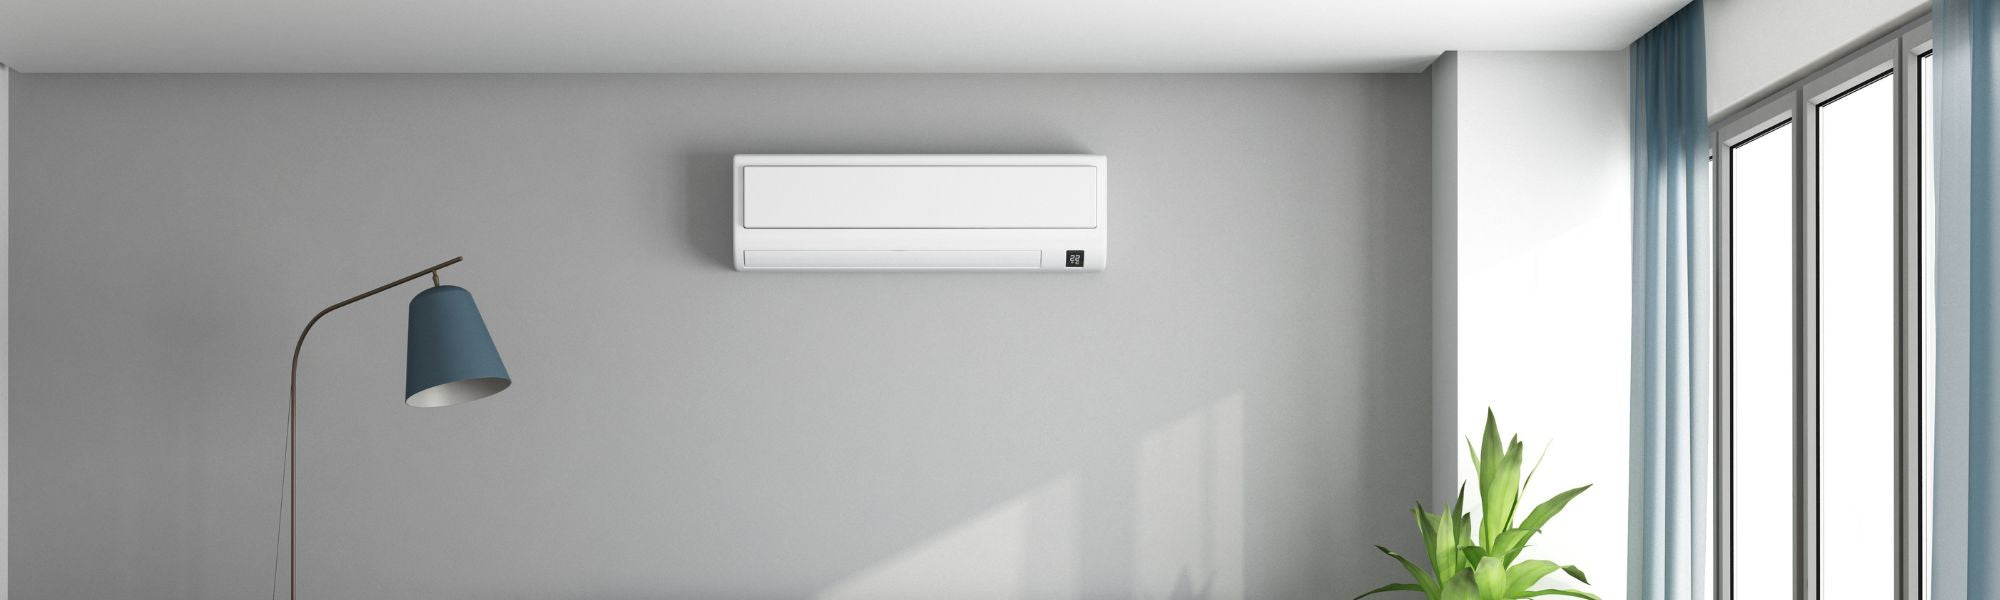 Aircondition in a smart home